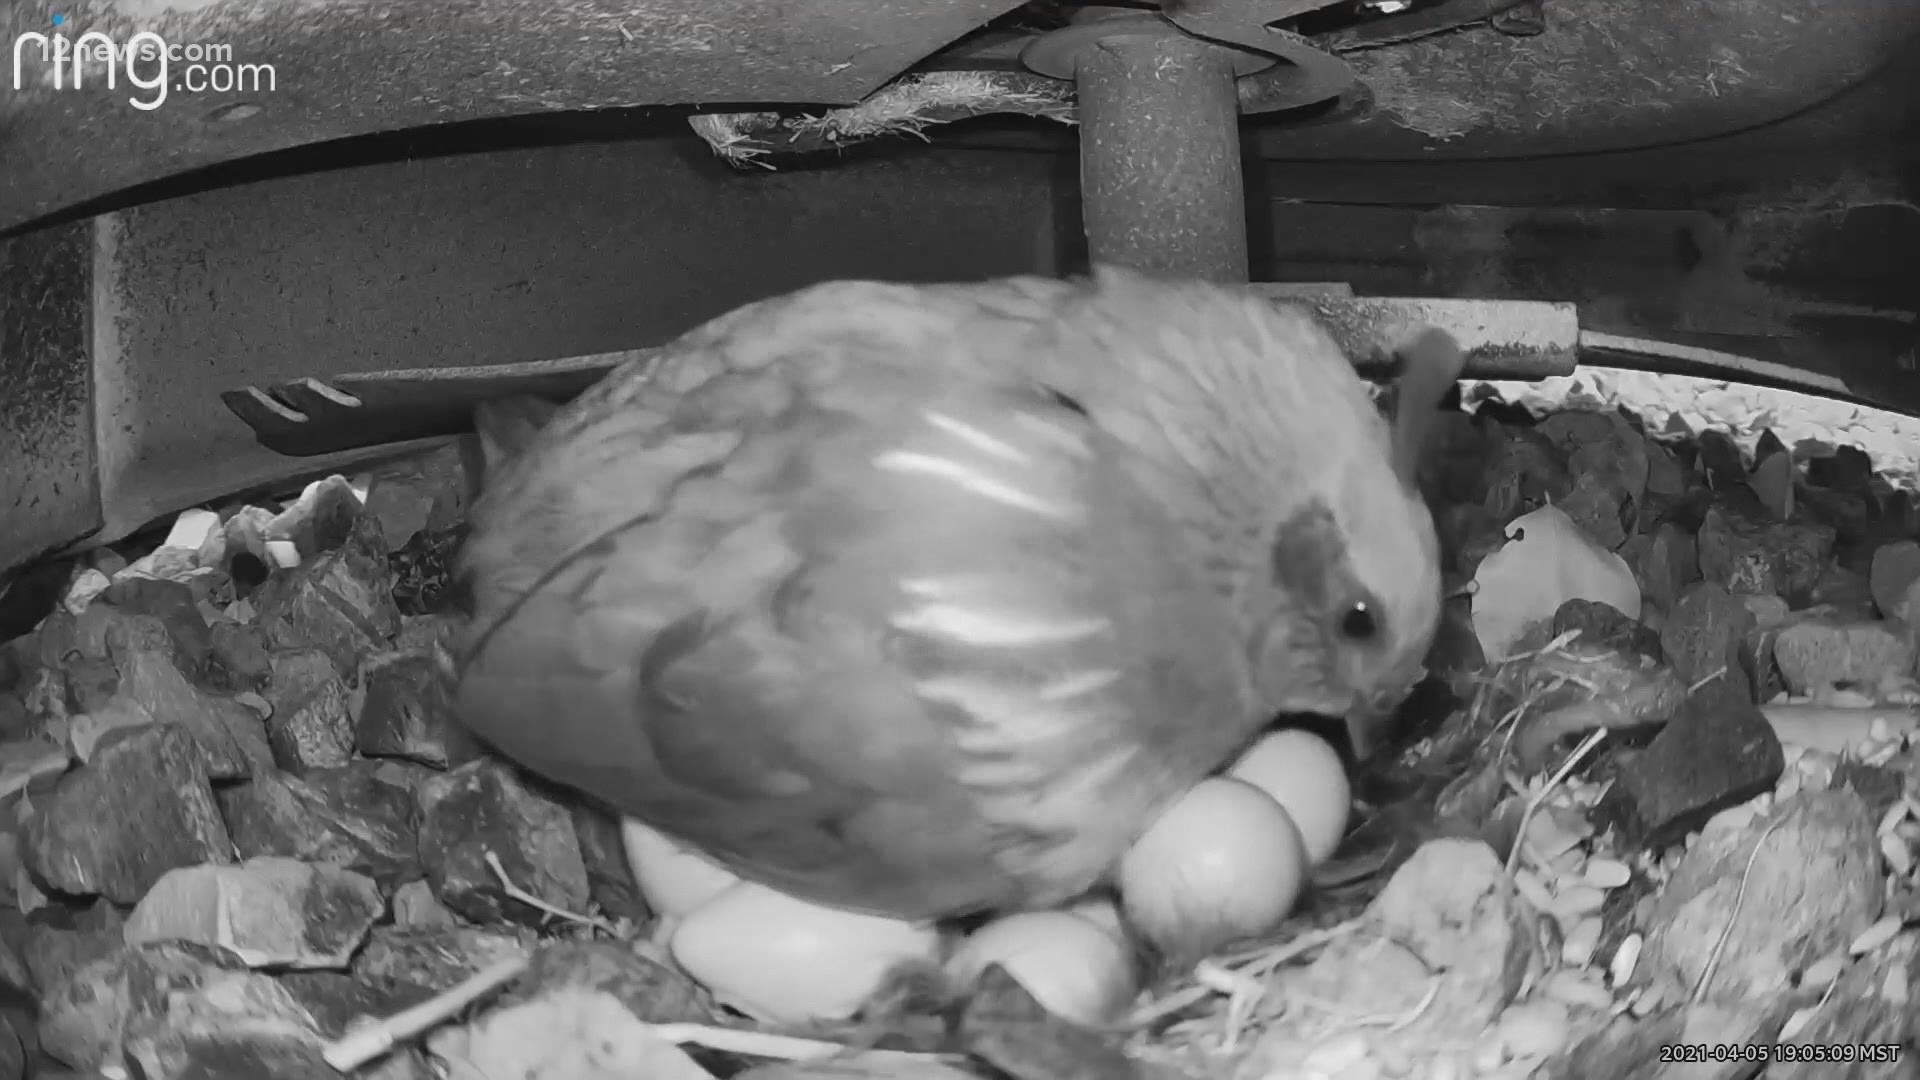 Due to popular demand, Jason and Kimberly Garde shared the process online. The eggs hatched just ahead of Mother's Day!